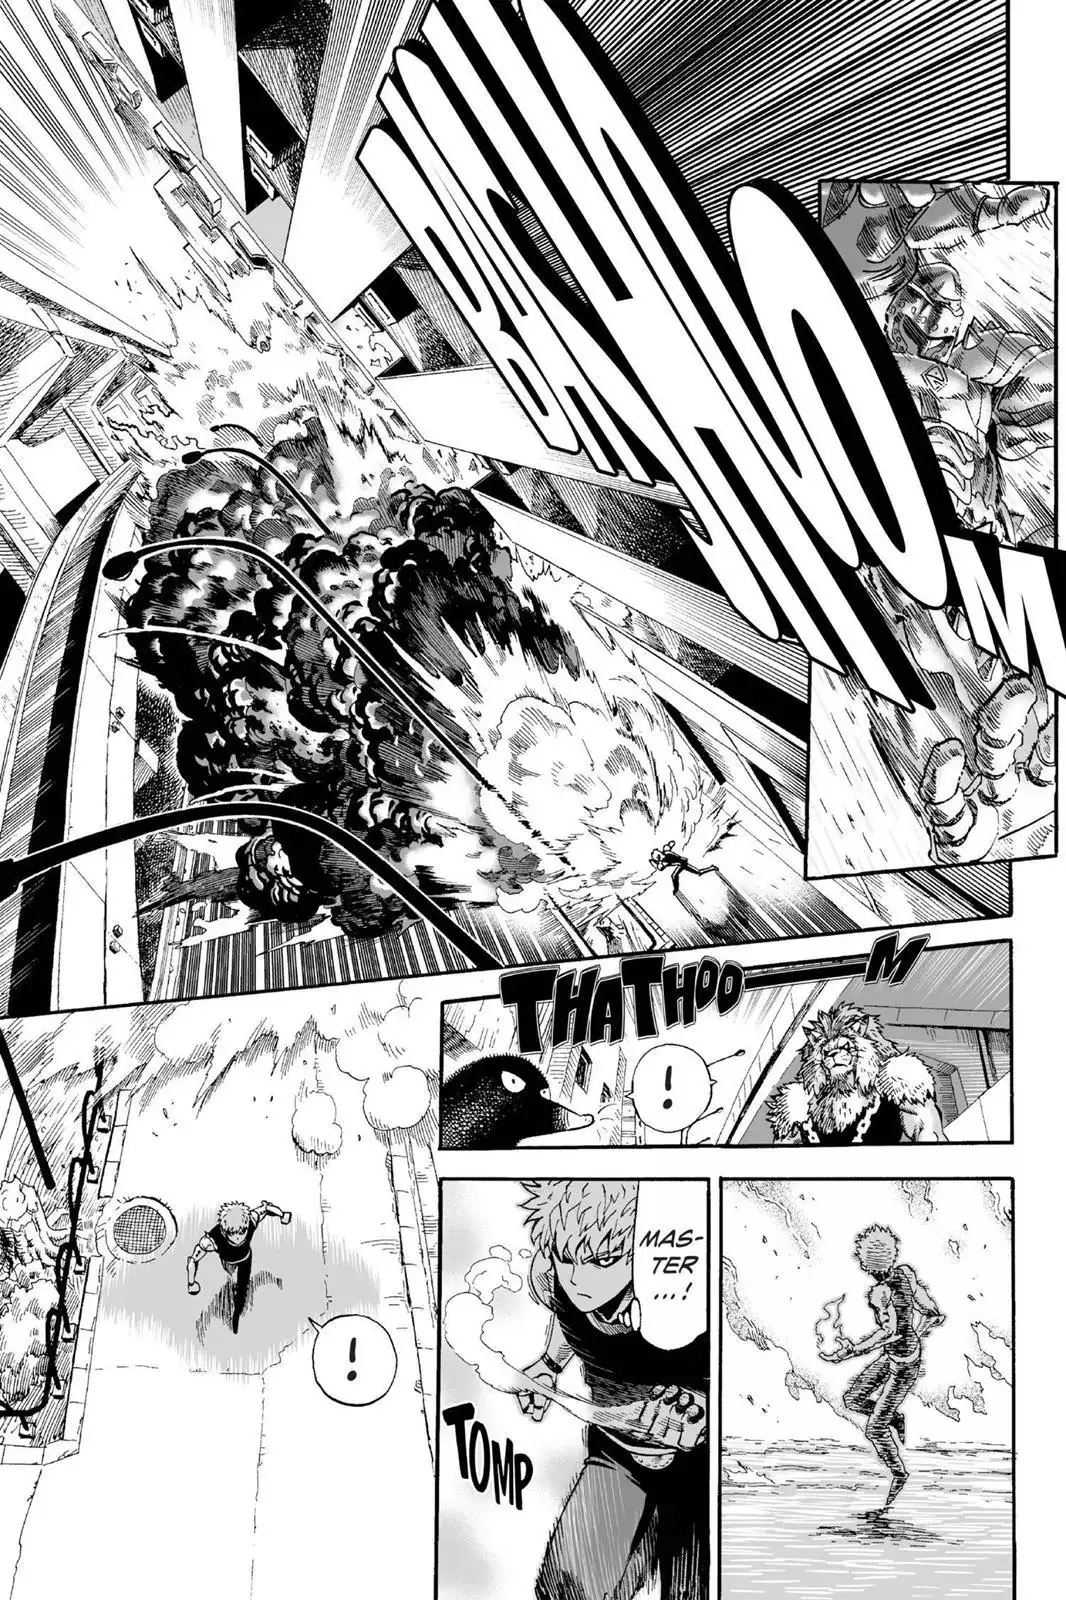 One Punch Man Chapter 8, READ One Punch Man Chapter 8 ONLINE, lost in the cloud genre,lost in the cloud gif,lost in the cloud girl,lost in the cloud goods,lost in the cloud goodreads,lost in the cloud,lost ark cloud gaming,lost odyssey cloud gaming,lost in the cloud fanart,lost in the cloud fanfic,lost in the cloud fandom,lost in the cloud first kiss,lost in the cloud font,lost in the cloud ending,lost in the cloud episode 97,lost in the cloud edit,lost in the cloud explained,lost in the cloud dog,lost in the cloud discord server,lost in the cloud desktop wallpaper,lost in the cloud drawing,can't find my cloud on network,lost in the cloud characters,lost in the cloud chapter 93 release date,lost in the cloud birthday,lost in the cloud birthday art,lost in the cloud background,lost in the cloud banner,lost in the clouds meaning,what is the black cloud in lost,lost in the cloud ao3,lost in the cloud anime,lost in the cloud art,lost in the cloud author twitter,lost in the cloud author instagram,lost in the cloud artist,lost in the cloud acrylic stand,lost in the cloud artist twitter,lost in the cloud art style,lost in the cloud analysis